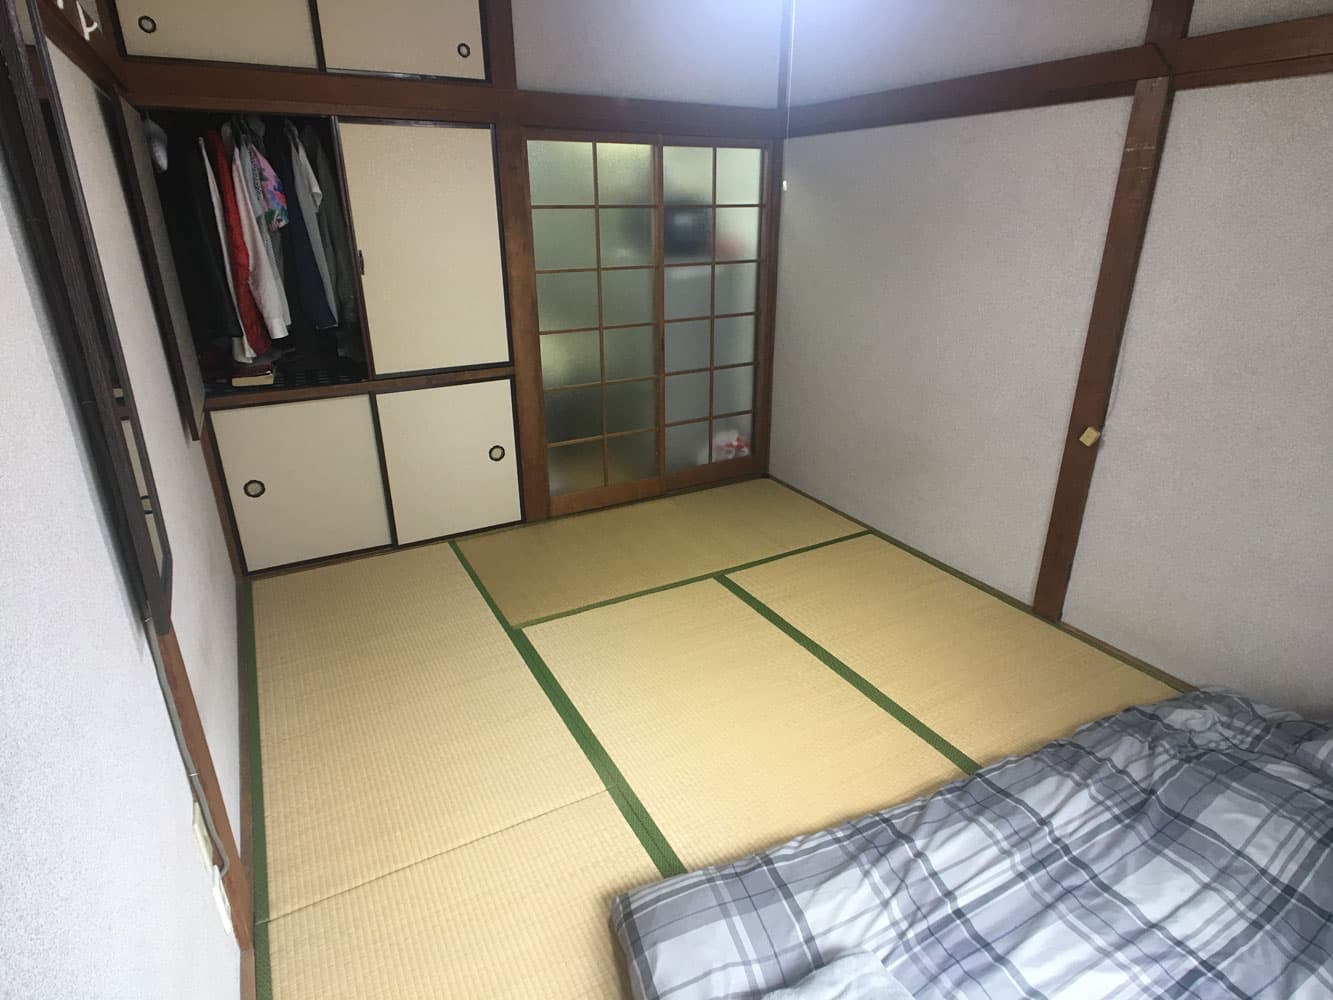 The traditional Japanese bedroom at Mitaka House, with tatami flooring and storage cabinets.